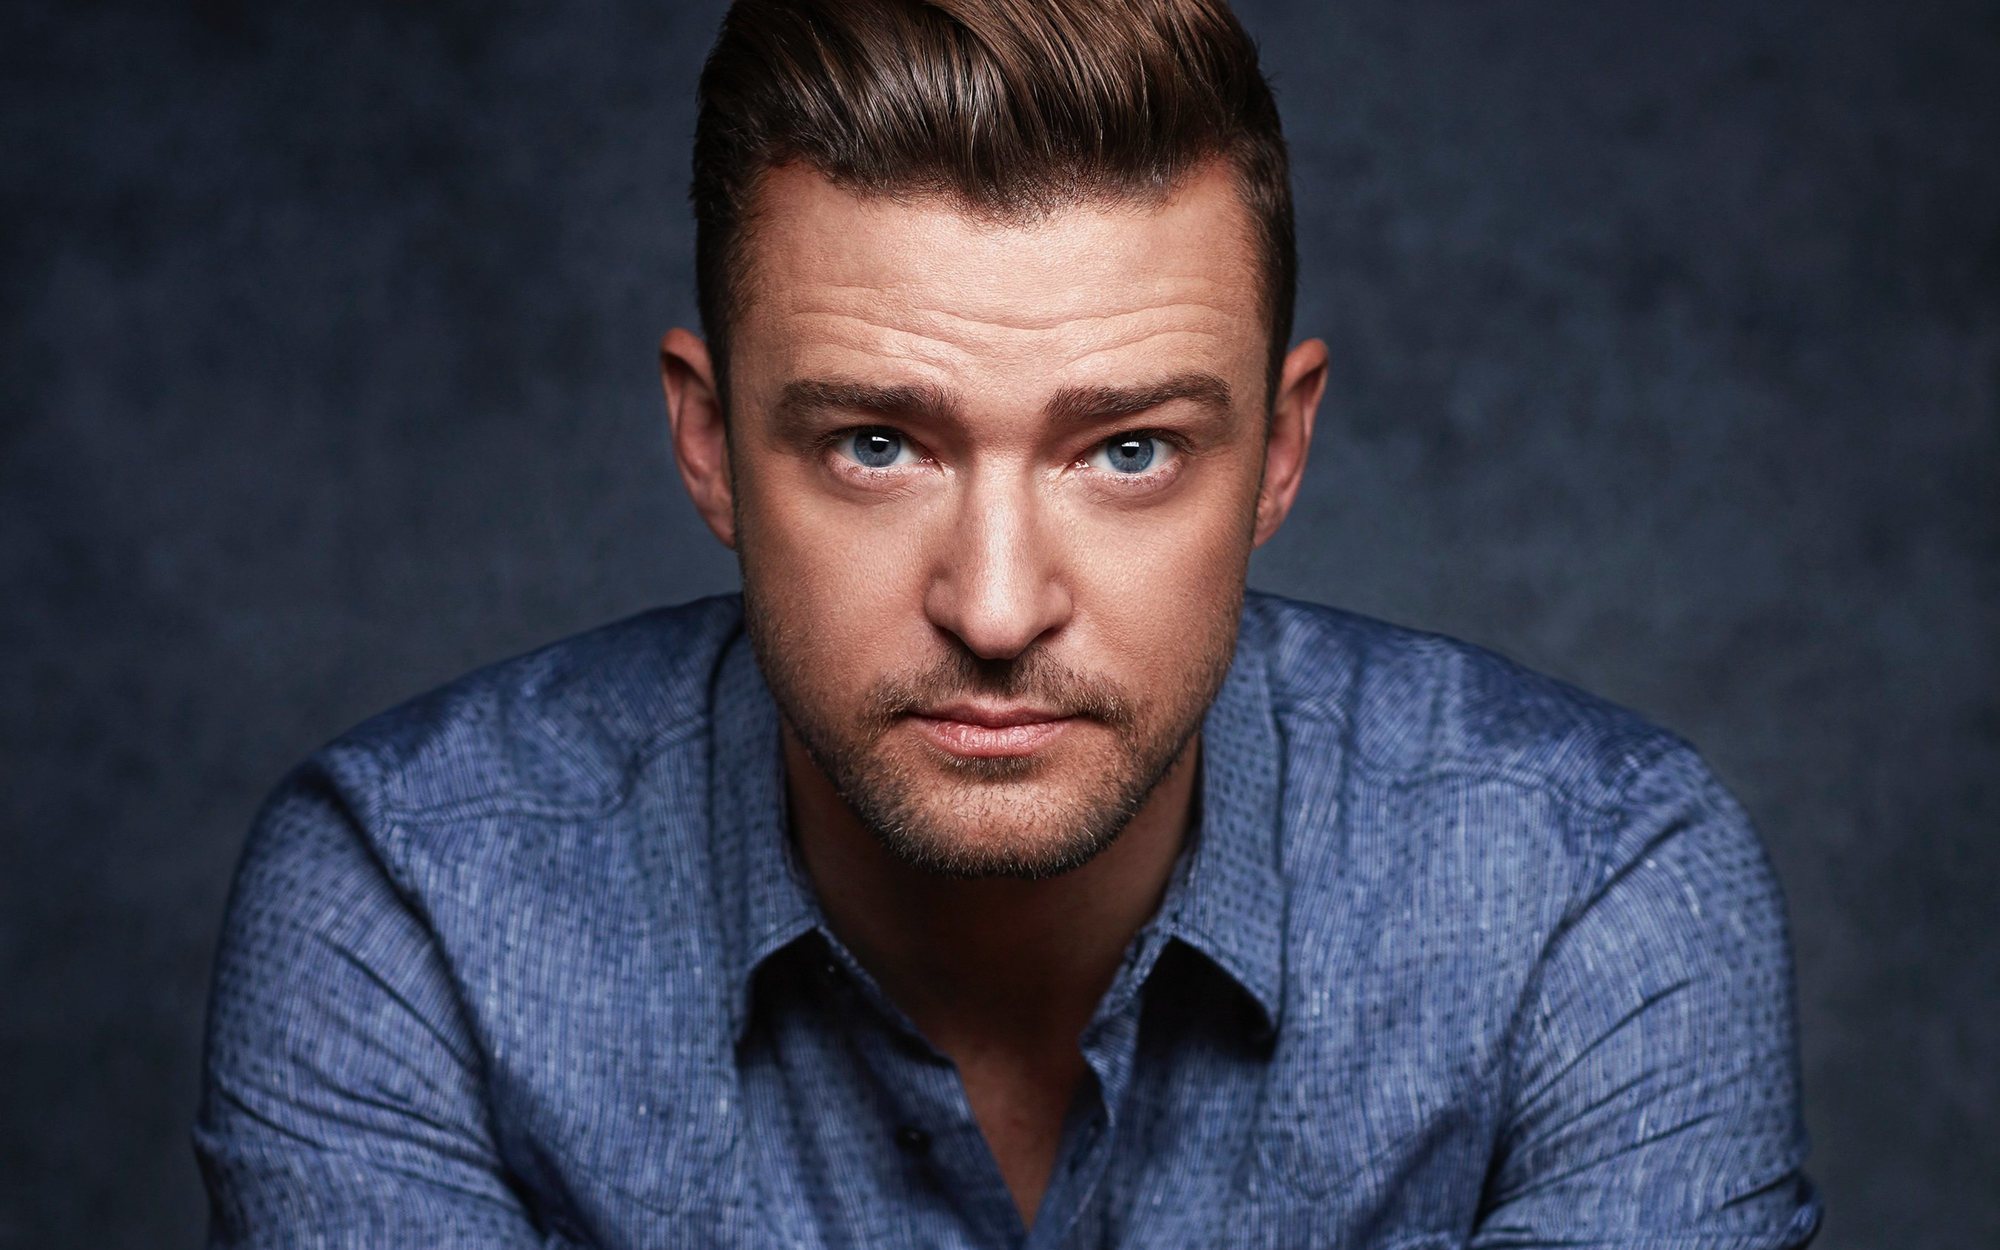 Justin Timberlake pide perdón a Britney Spears y Janet Jackson: "Les fallé"